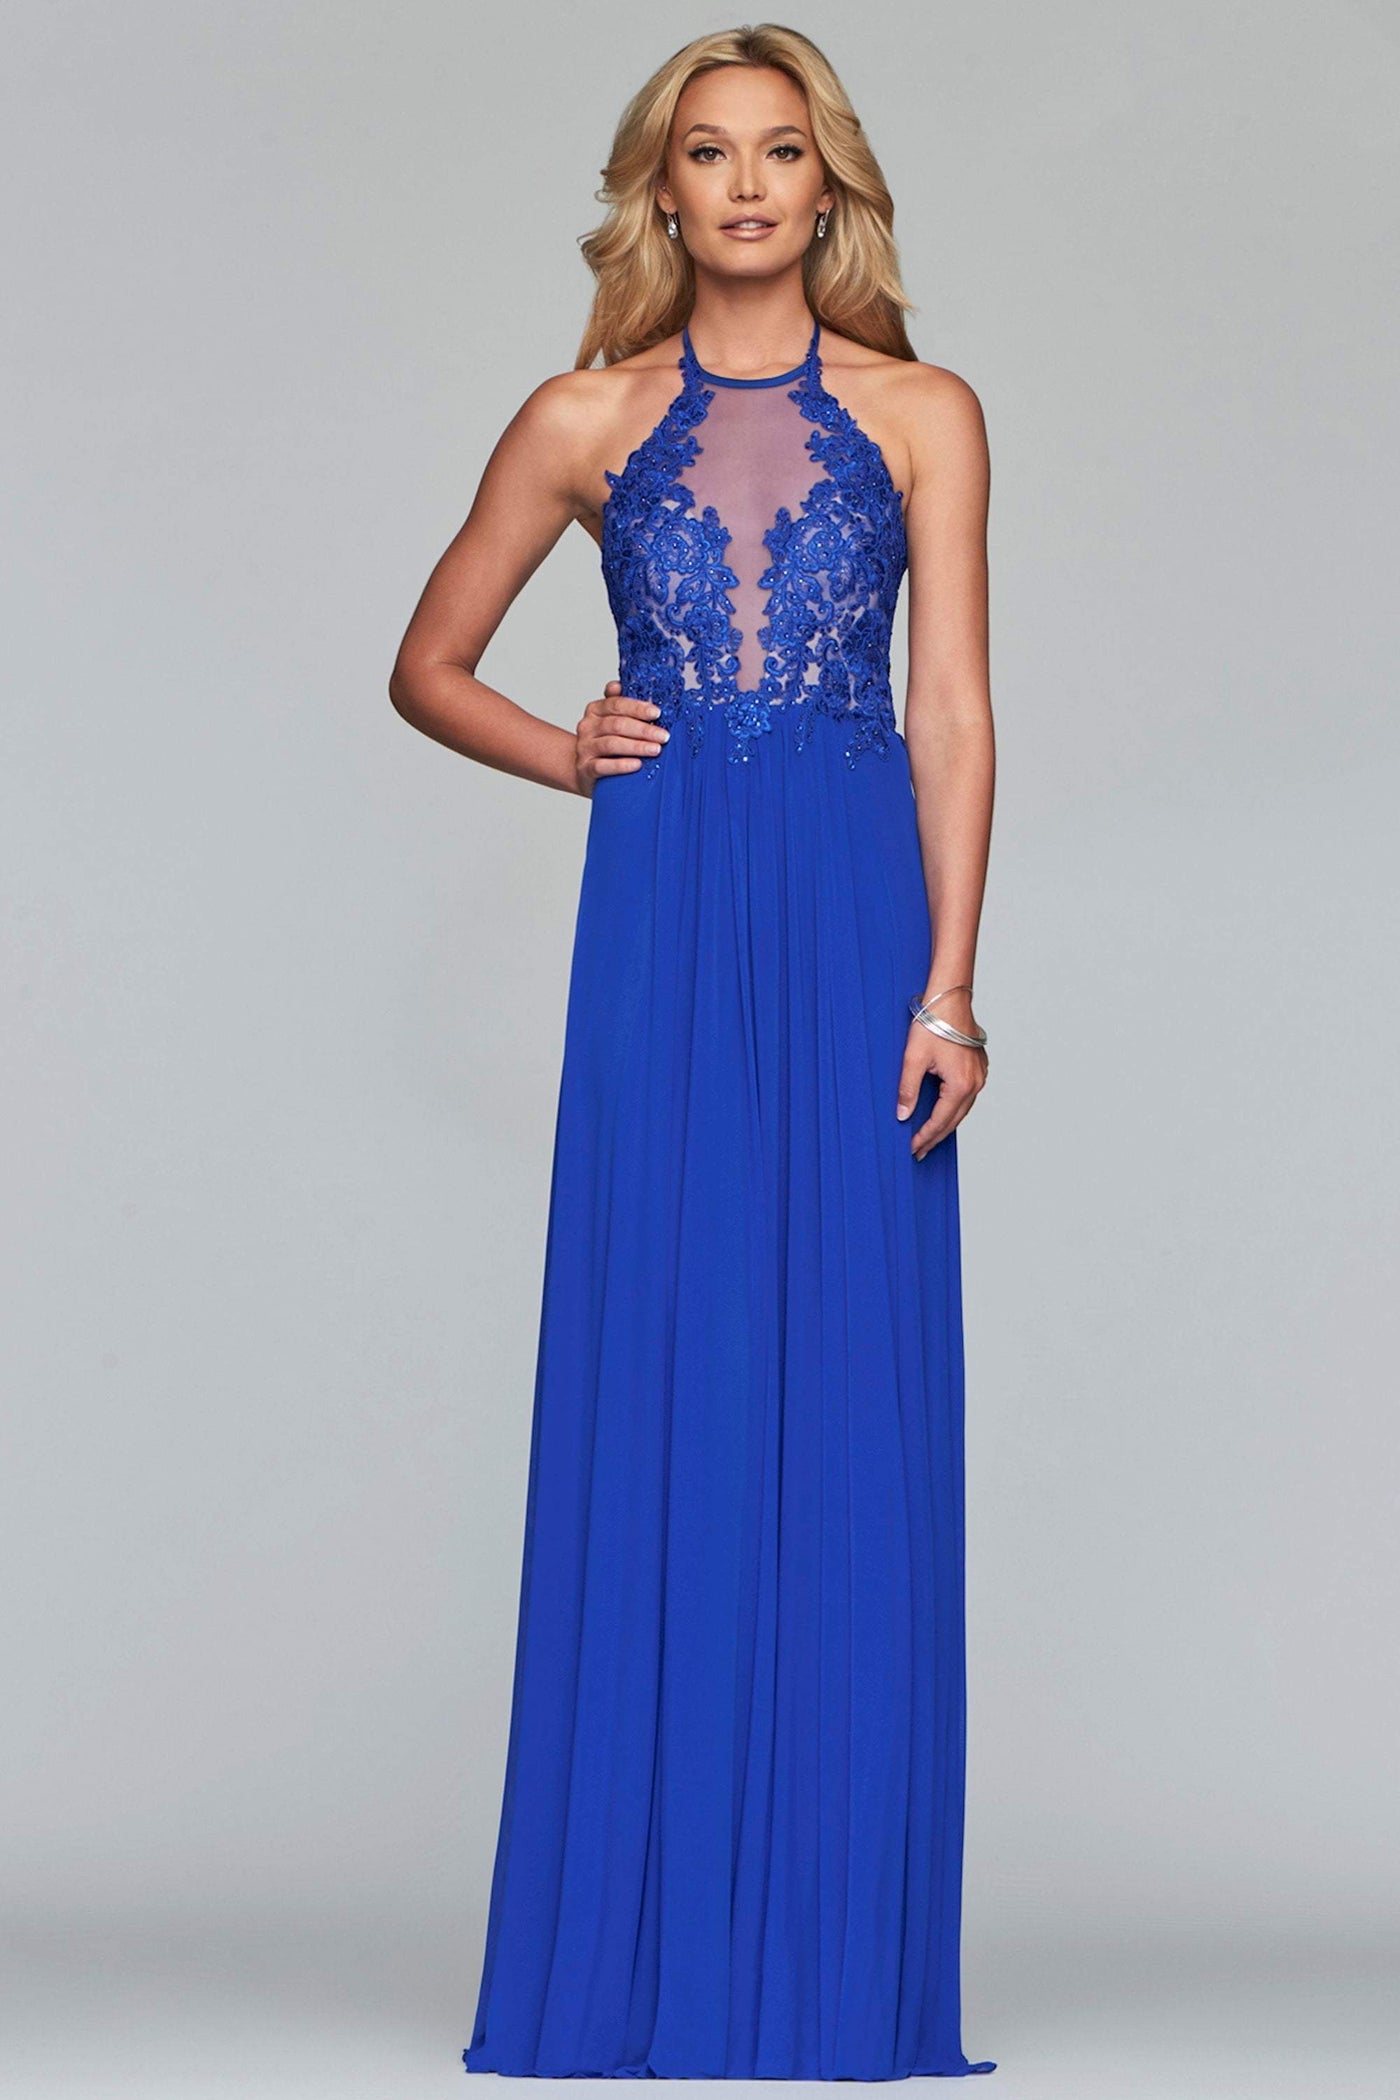 Faviana - Lace Appliqued Illusion Halter Evening Dress S10203  In Blue